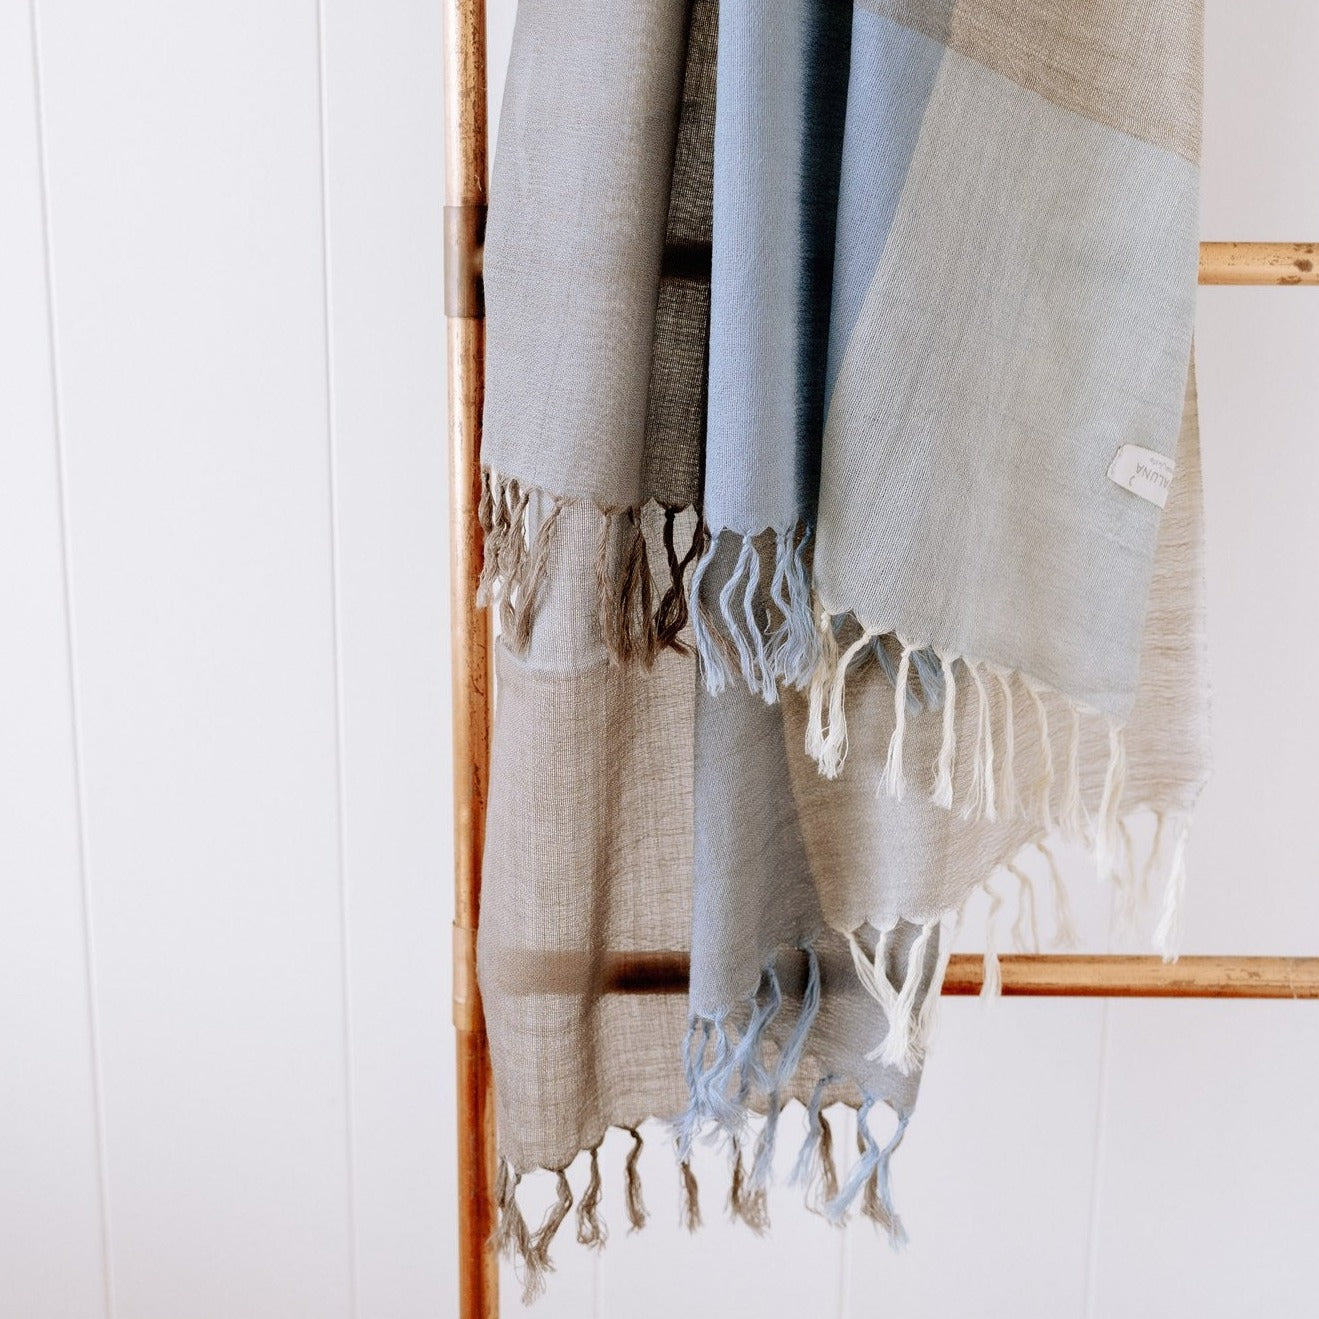 Fine Wool Scarf in Taupe, Cream and Skye Blue